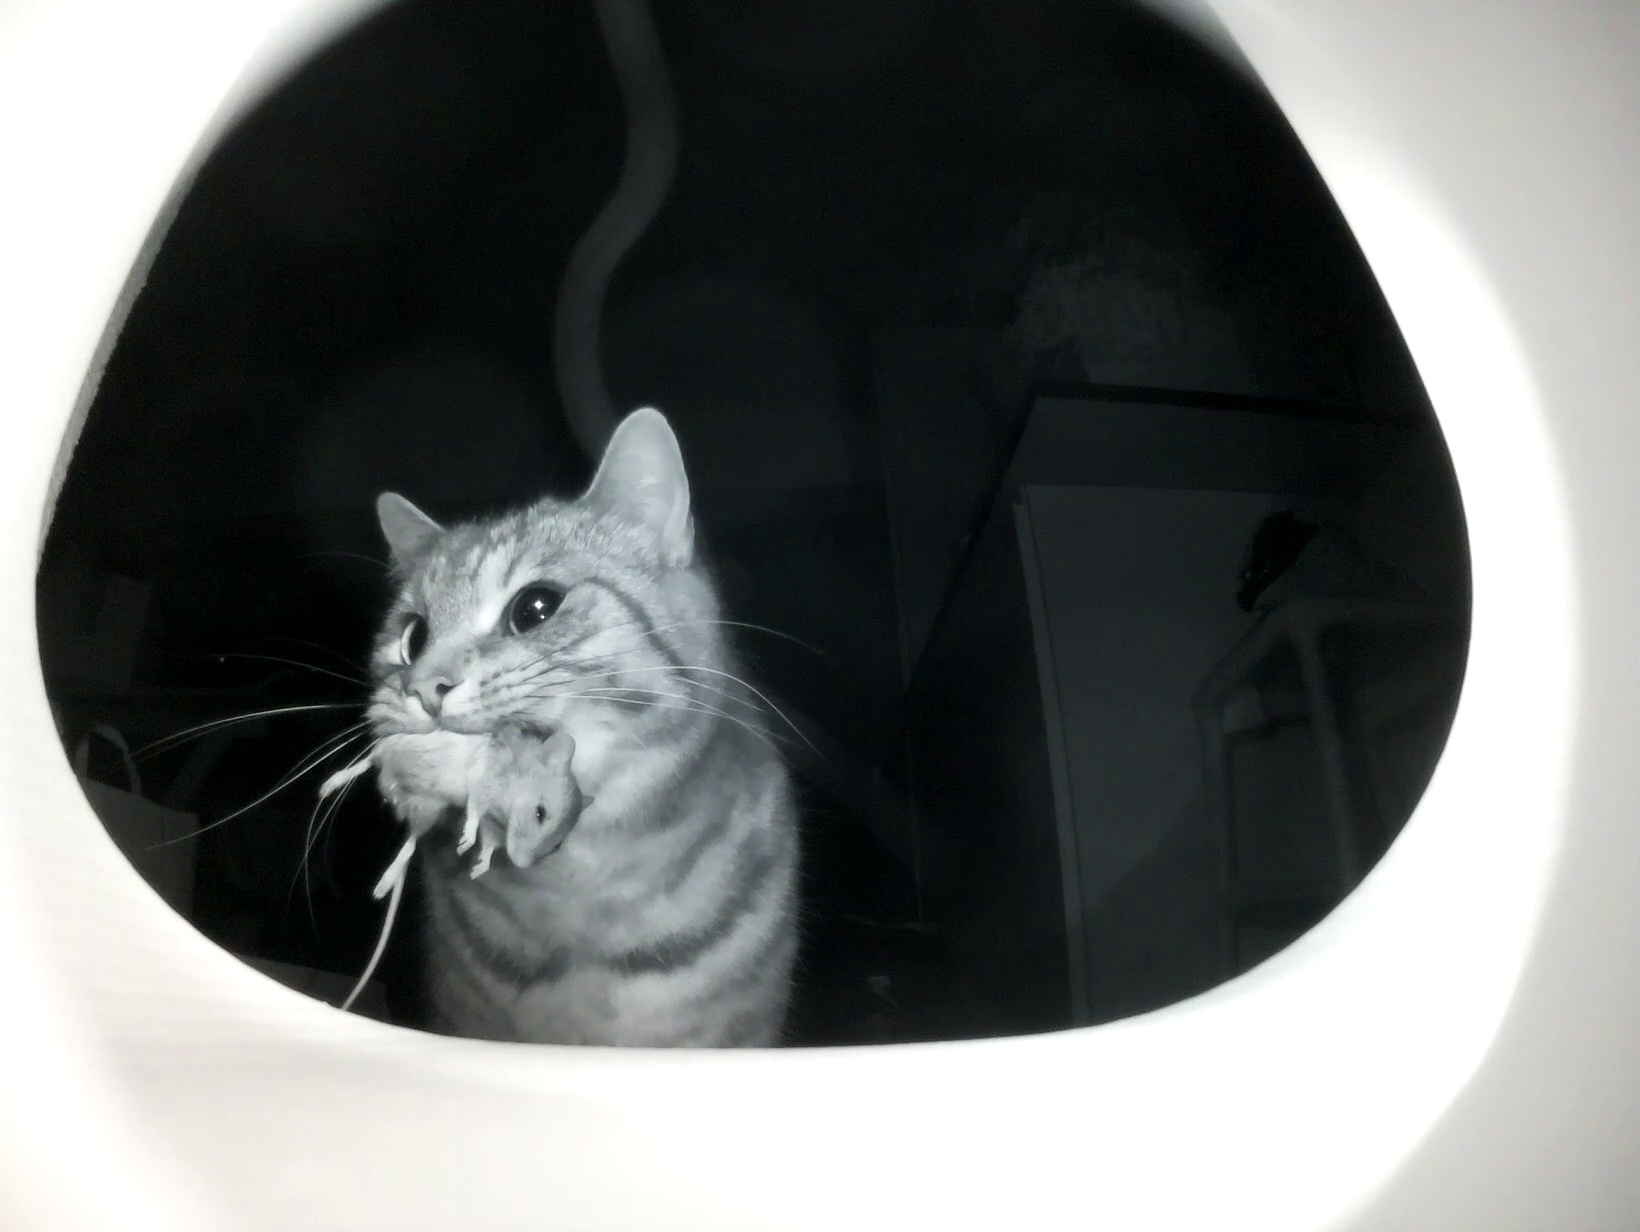 Flappie smart cat flap which can detect when a pet brings home prey